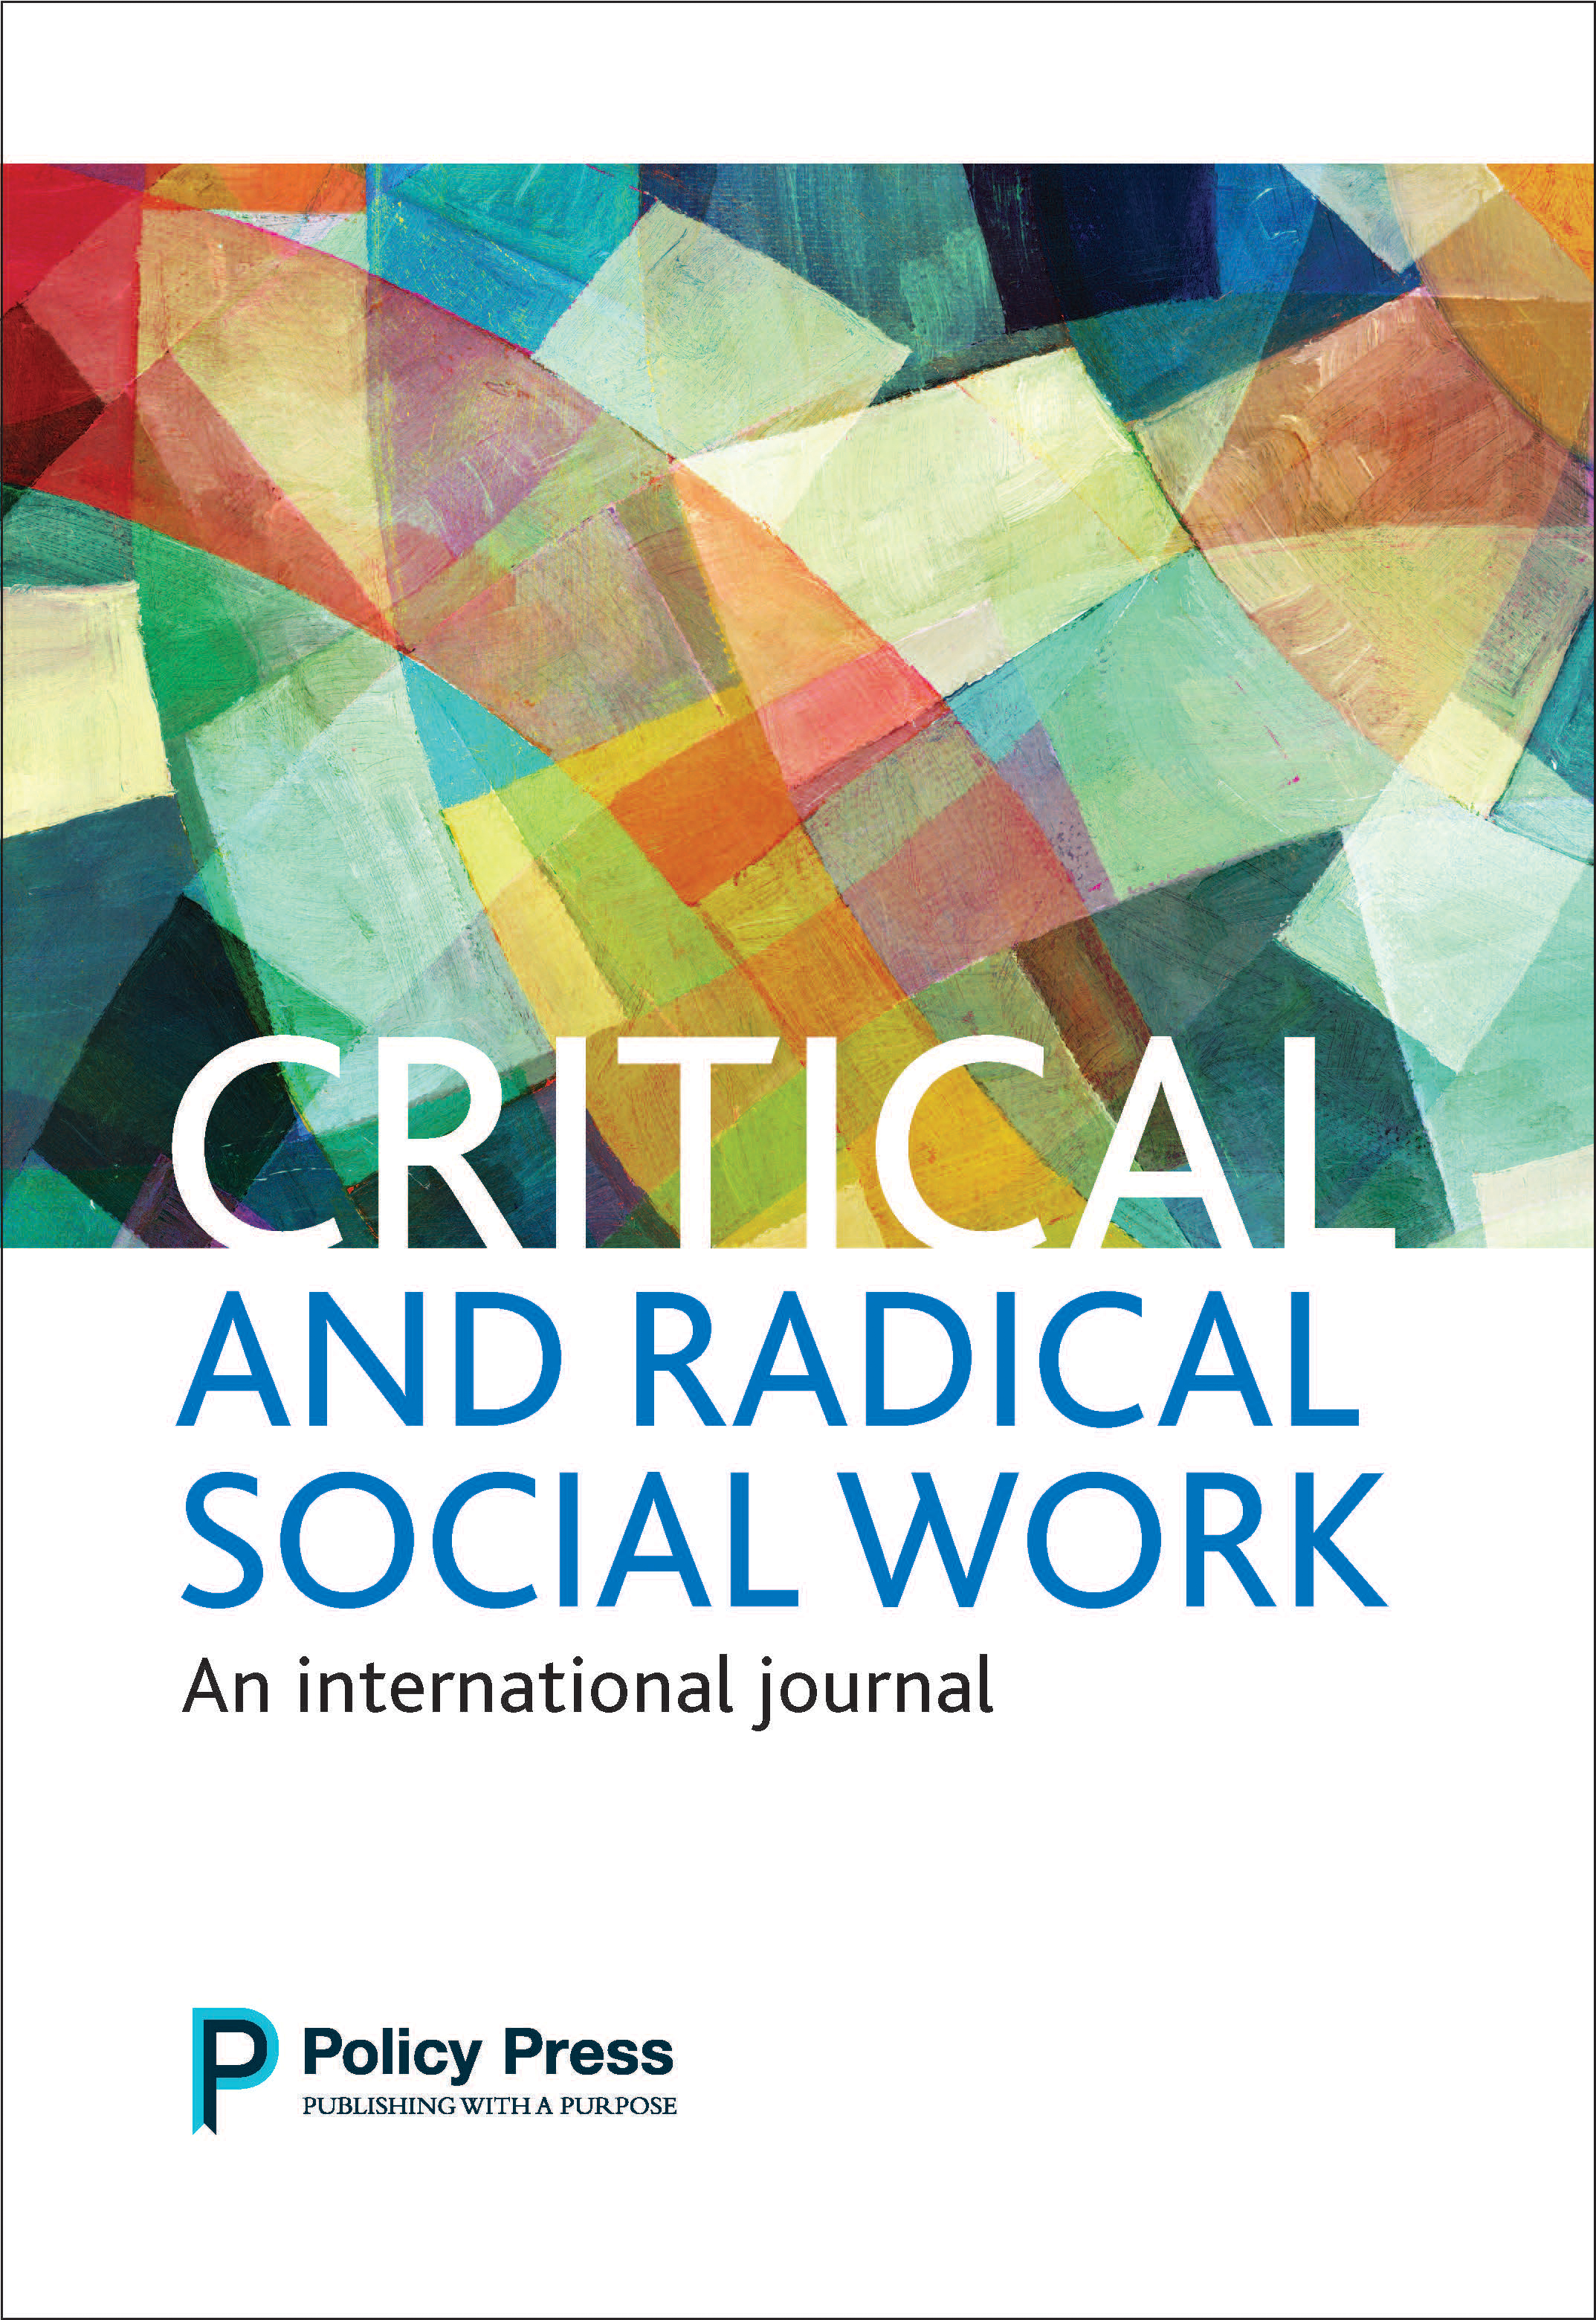 crisis intervention theory social work uk